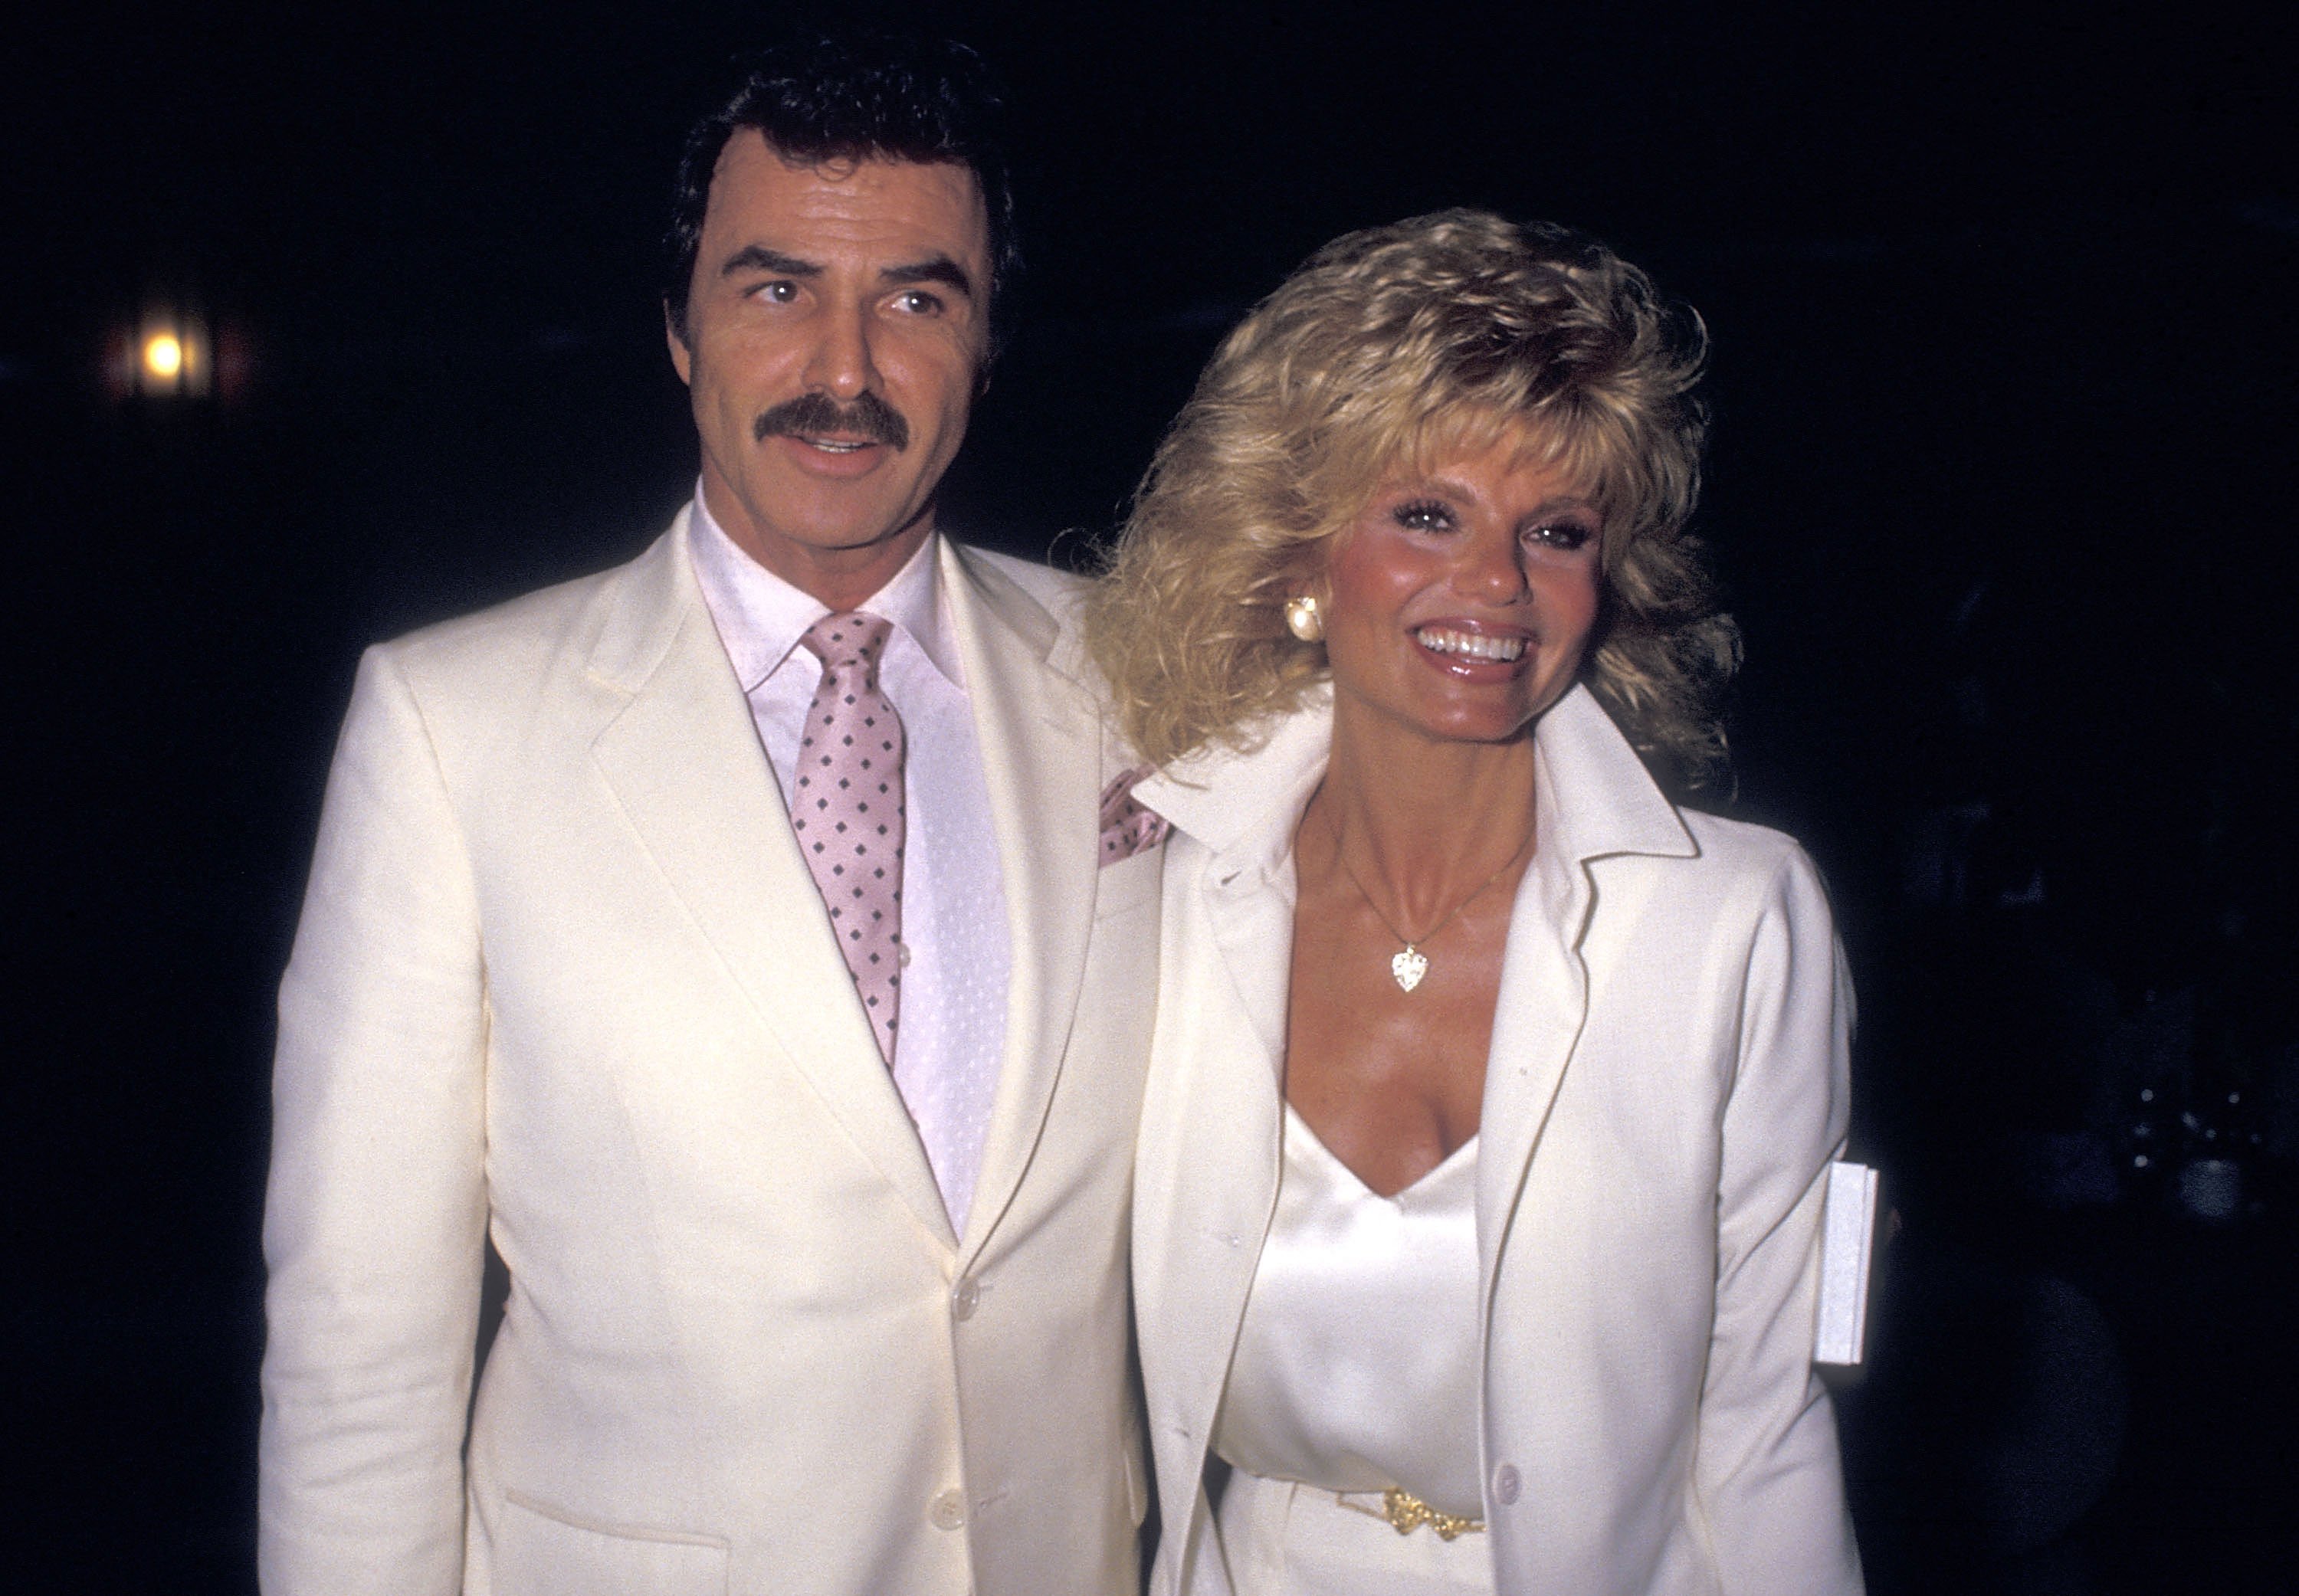 Burt Reynolds and his wife Anderson attending the Eastman Kodak's First Annual Eastman Second Century Award Salute at the Hollywood Roosevelt Hotel on March 27, 1987 in Hollywood, California. / Source: Getty Images